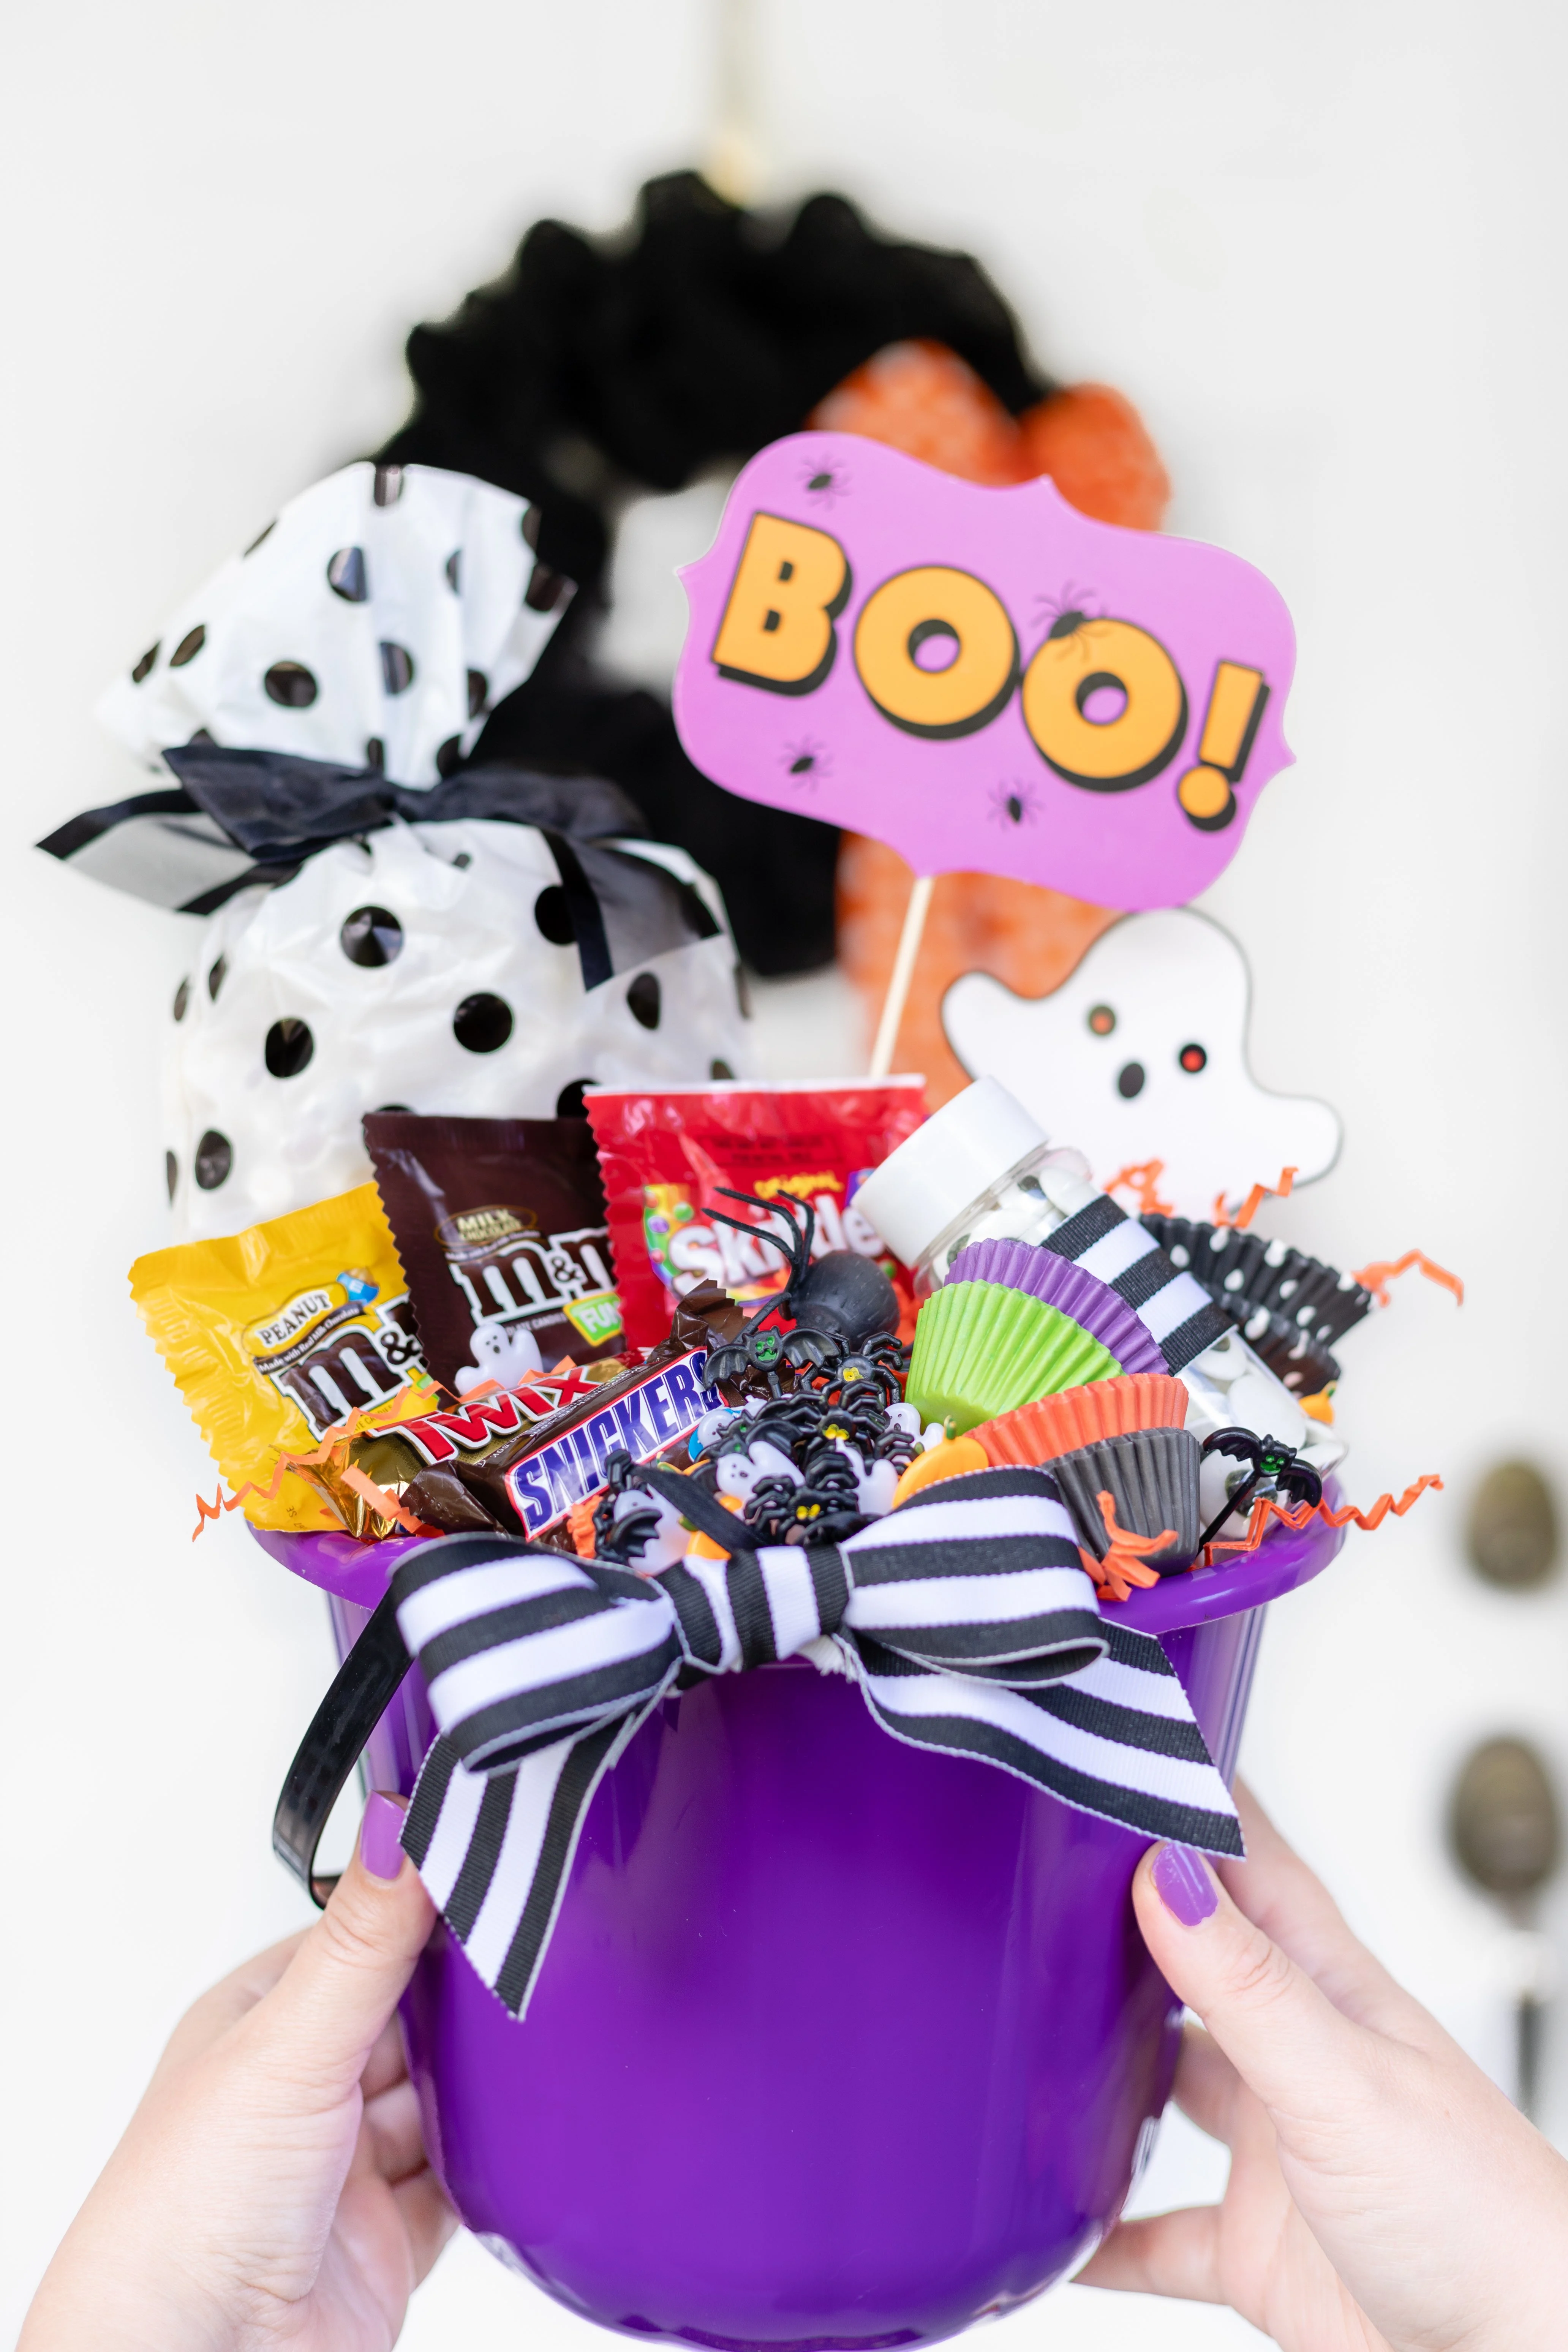 How to Boo Someone for Halloween. Boo gift basket ideas.